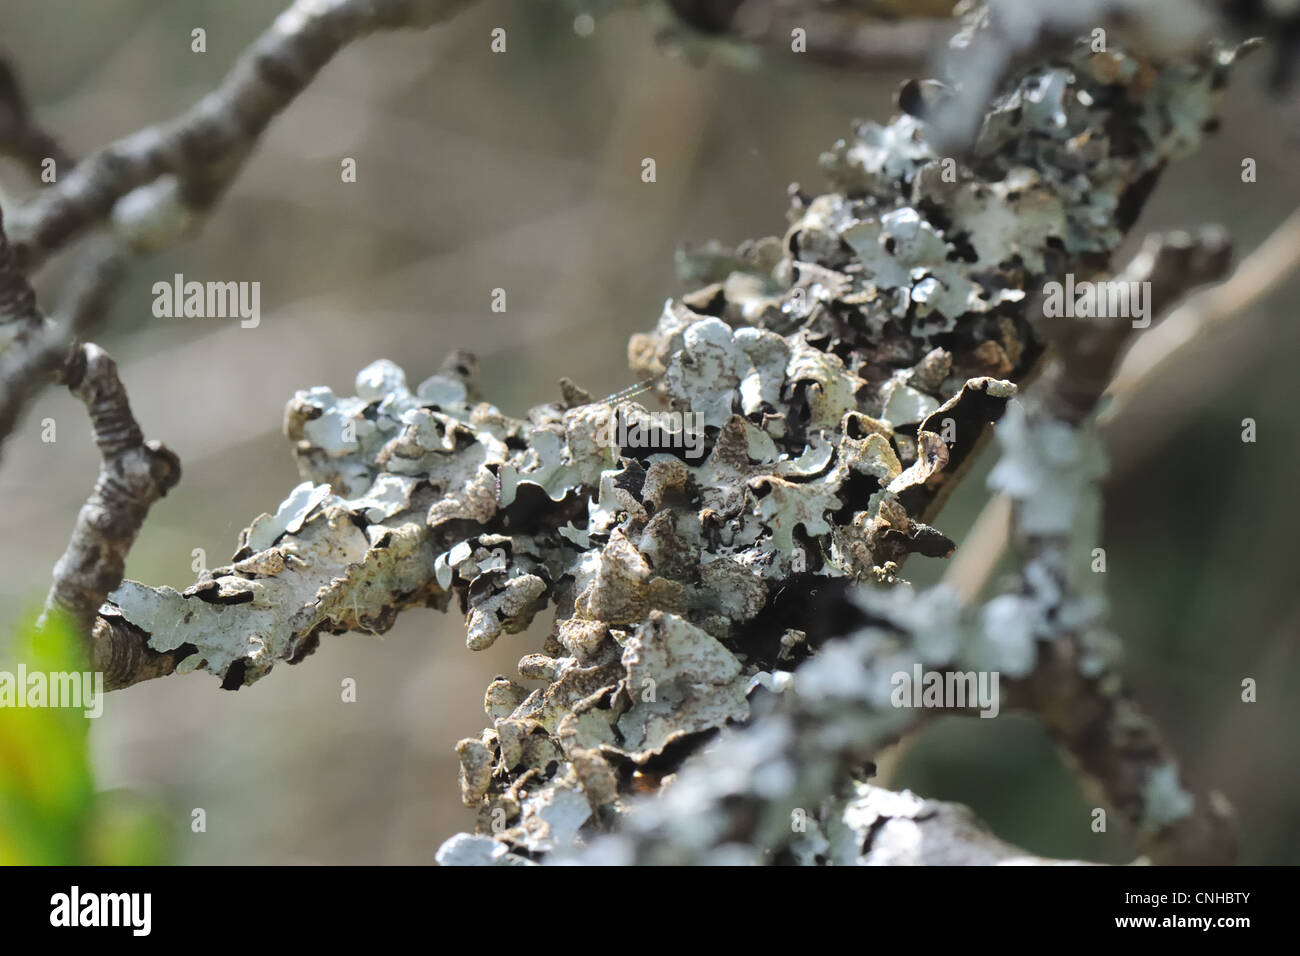 Foliose lichen growing on the branches of a small tree in Scotland, UK. Stock Photo